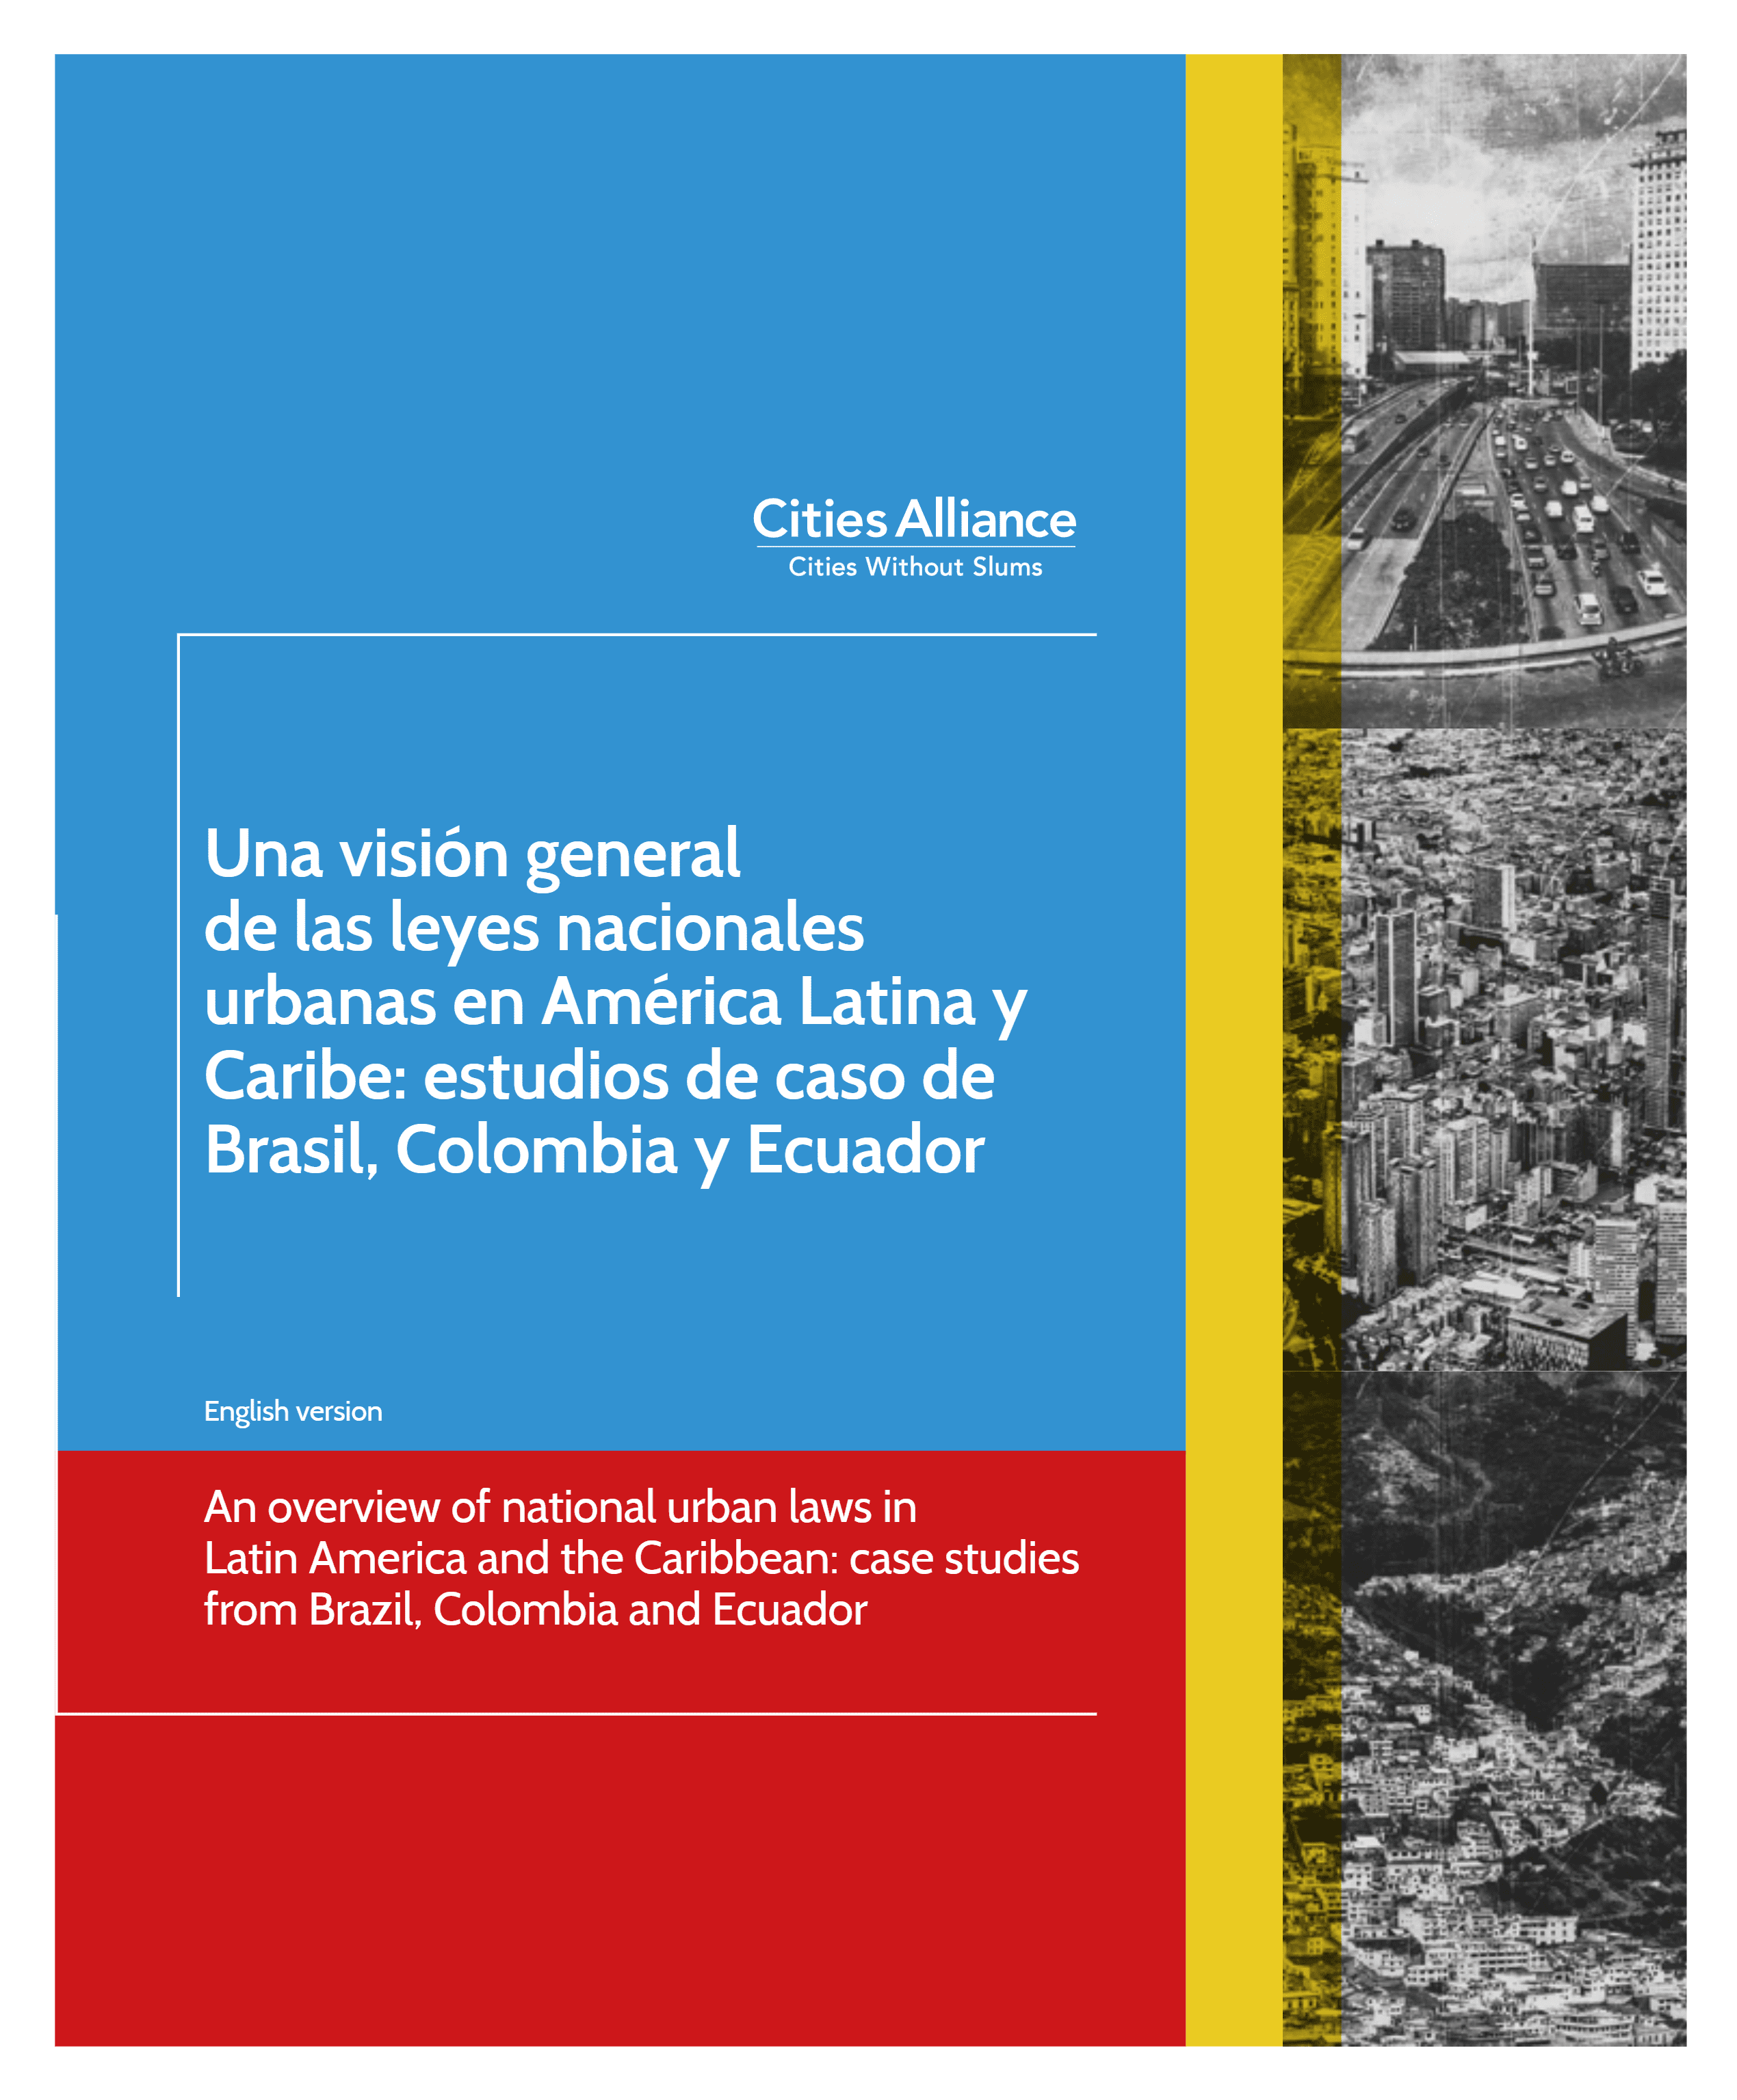 An Overview of National Urban Laws in Latin America and the Caribbean